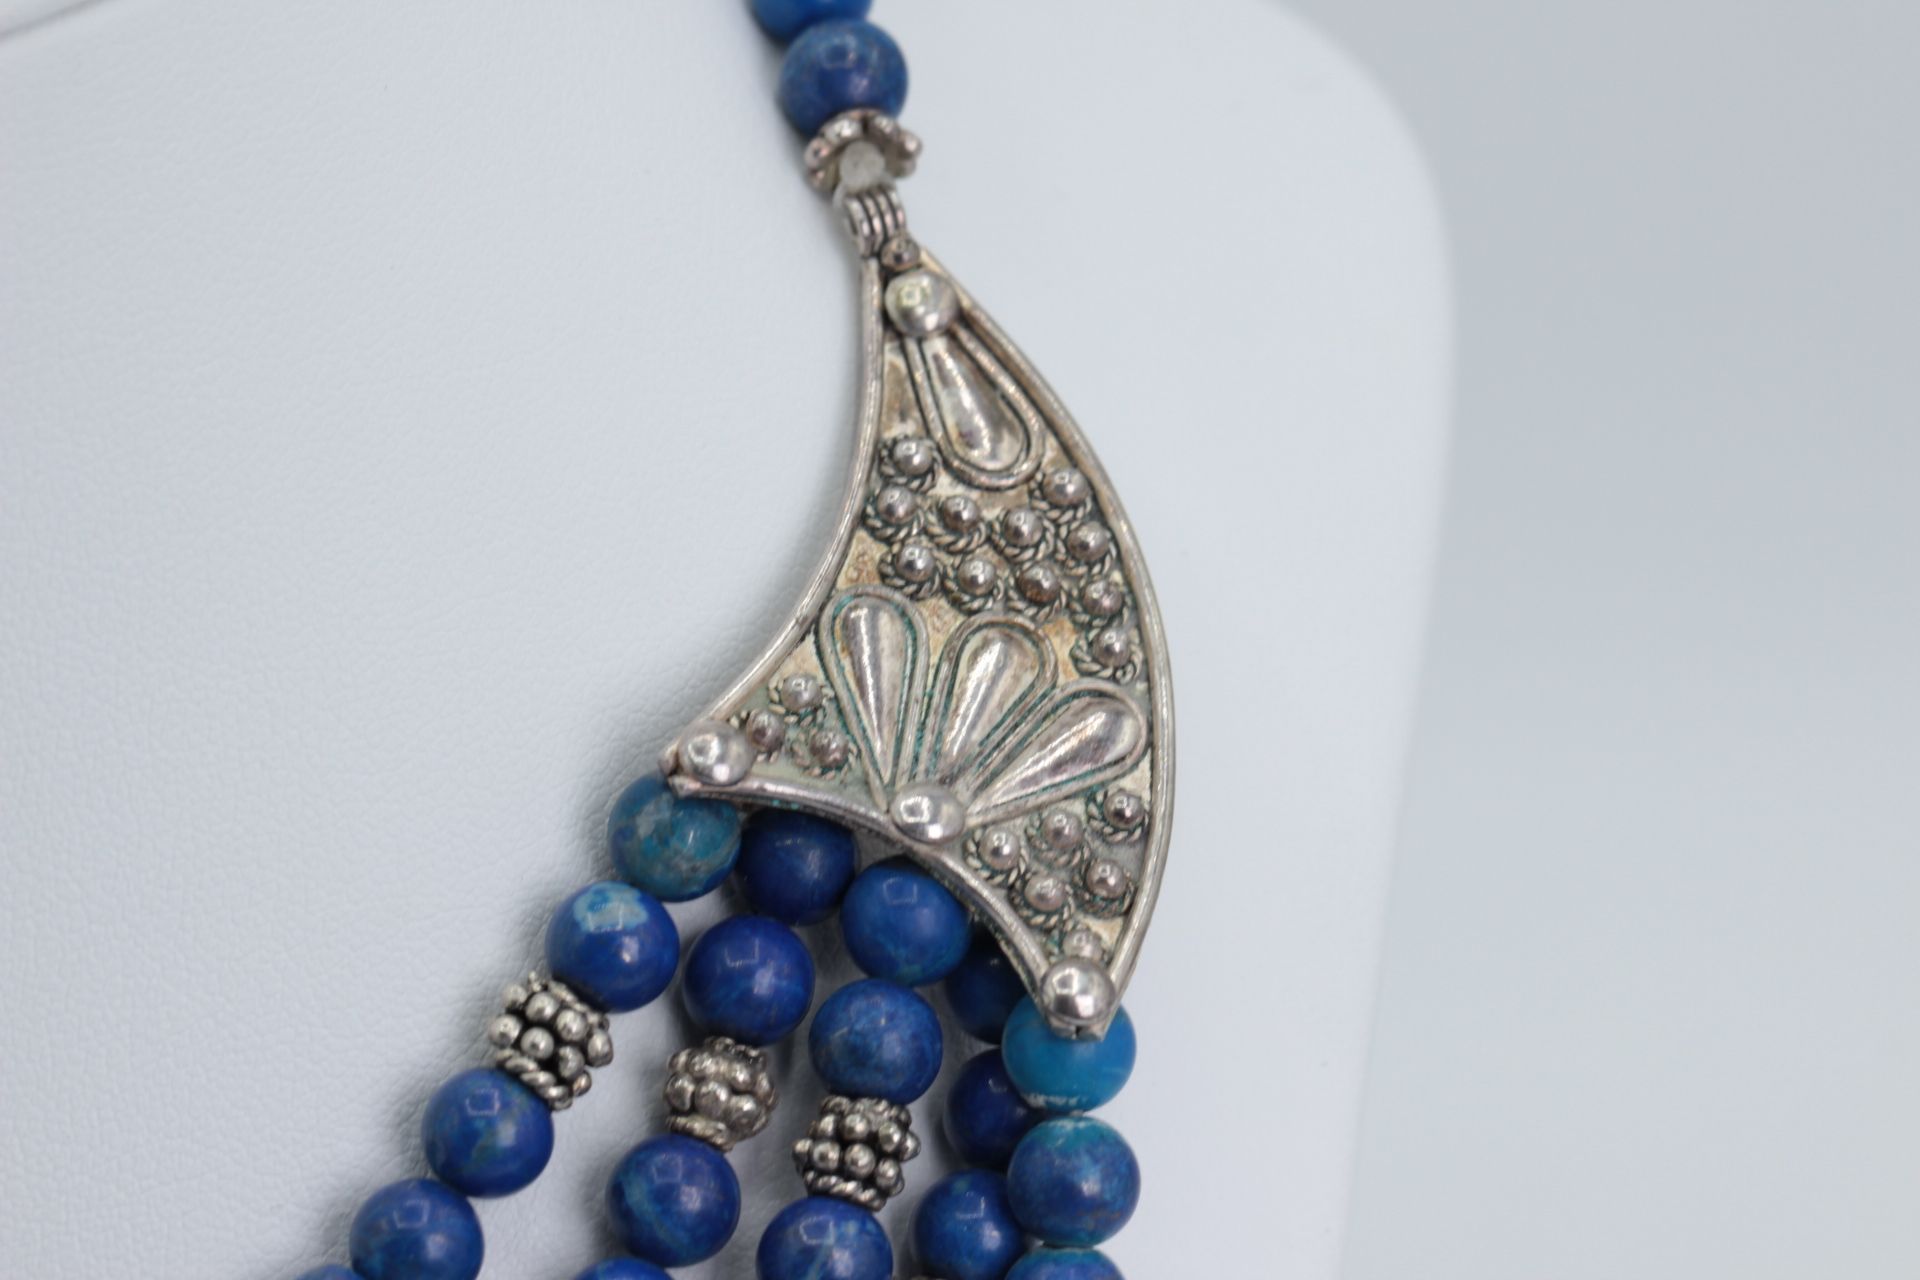 Ottoman Silver necklace with blue beads, centerpiece set with apatite - Image 4 of 7